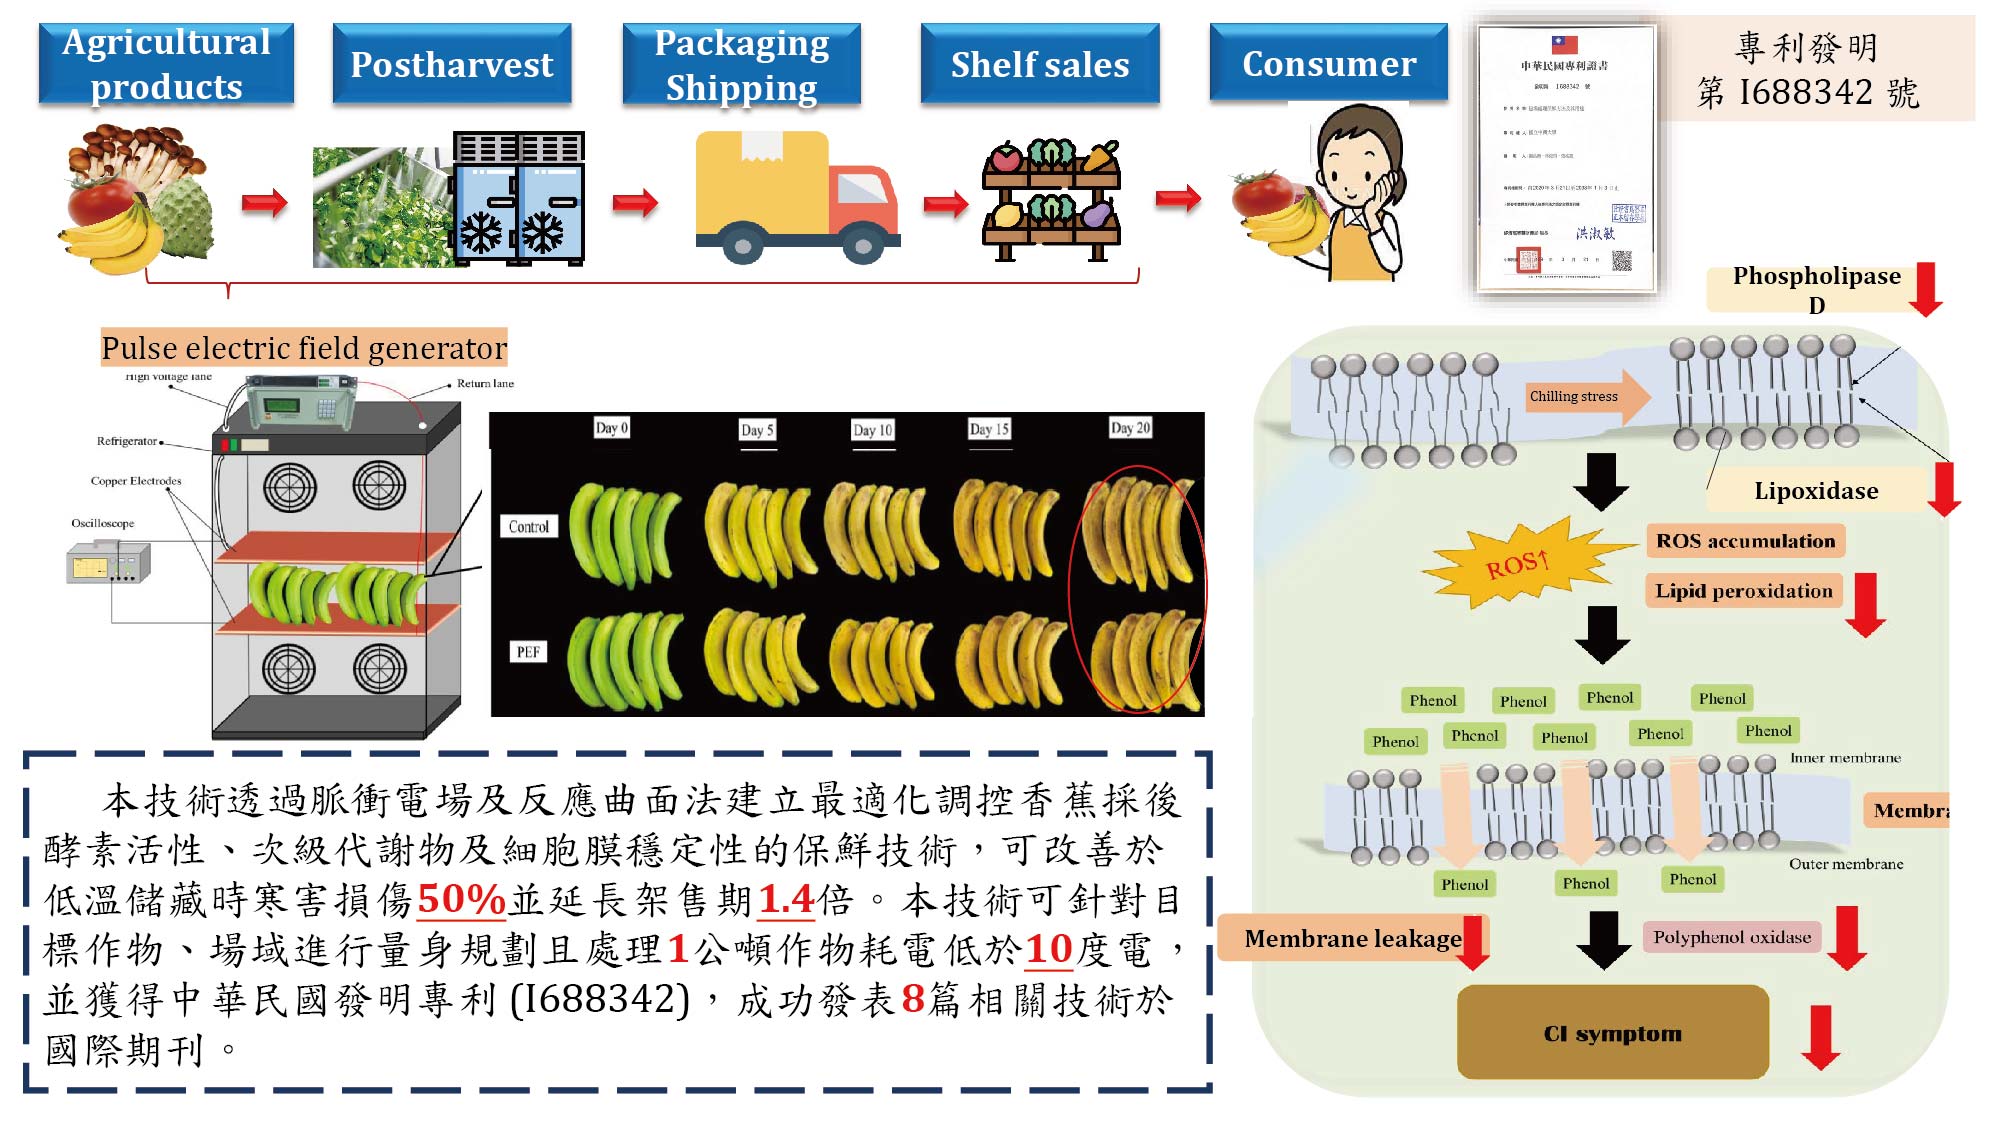 Application of a novel pulsed electric field technology to delay fruit chilling injury toward achieving a sustainable agricultural development goal